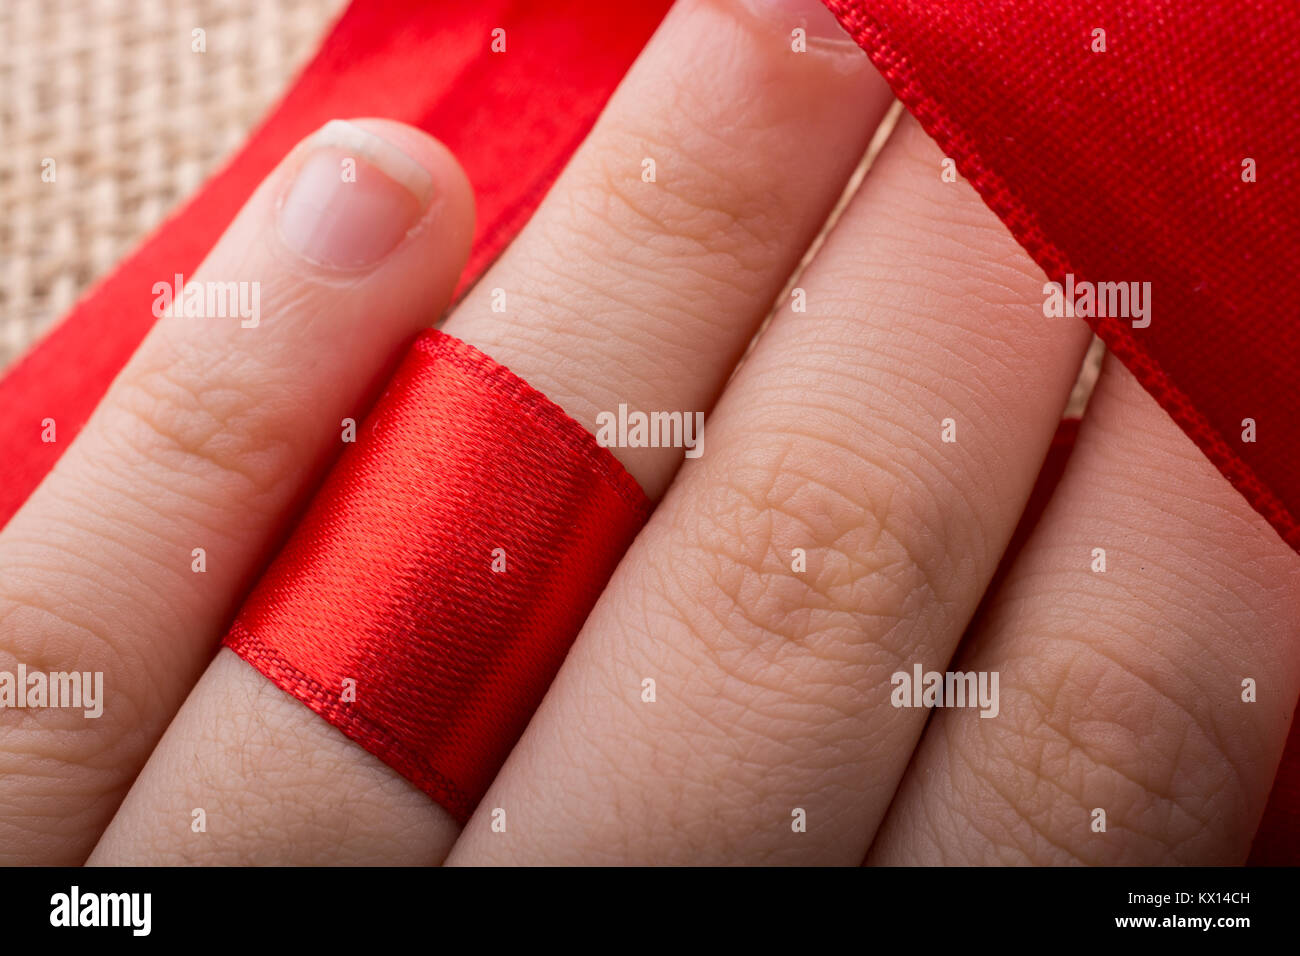 Red string tied around ring finger of the hand Stock Photo - Alamy